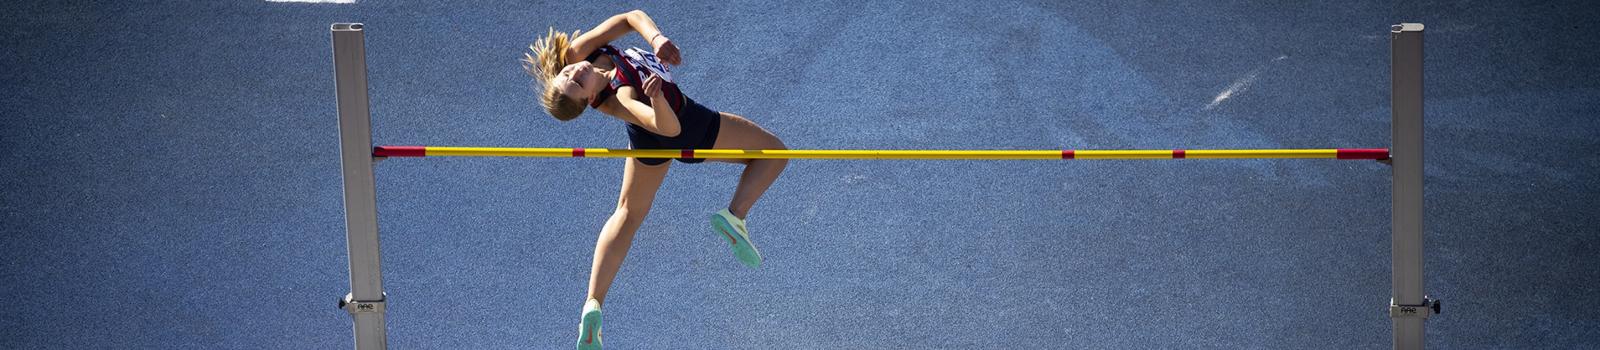 Student pole vaulting at the Penn relays